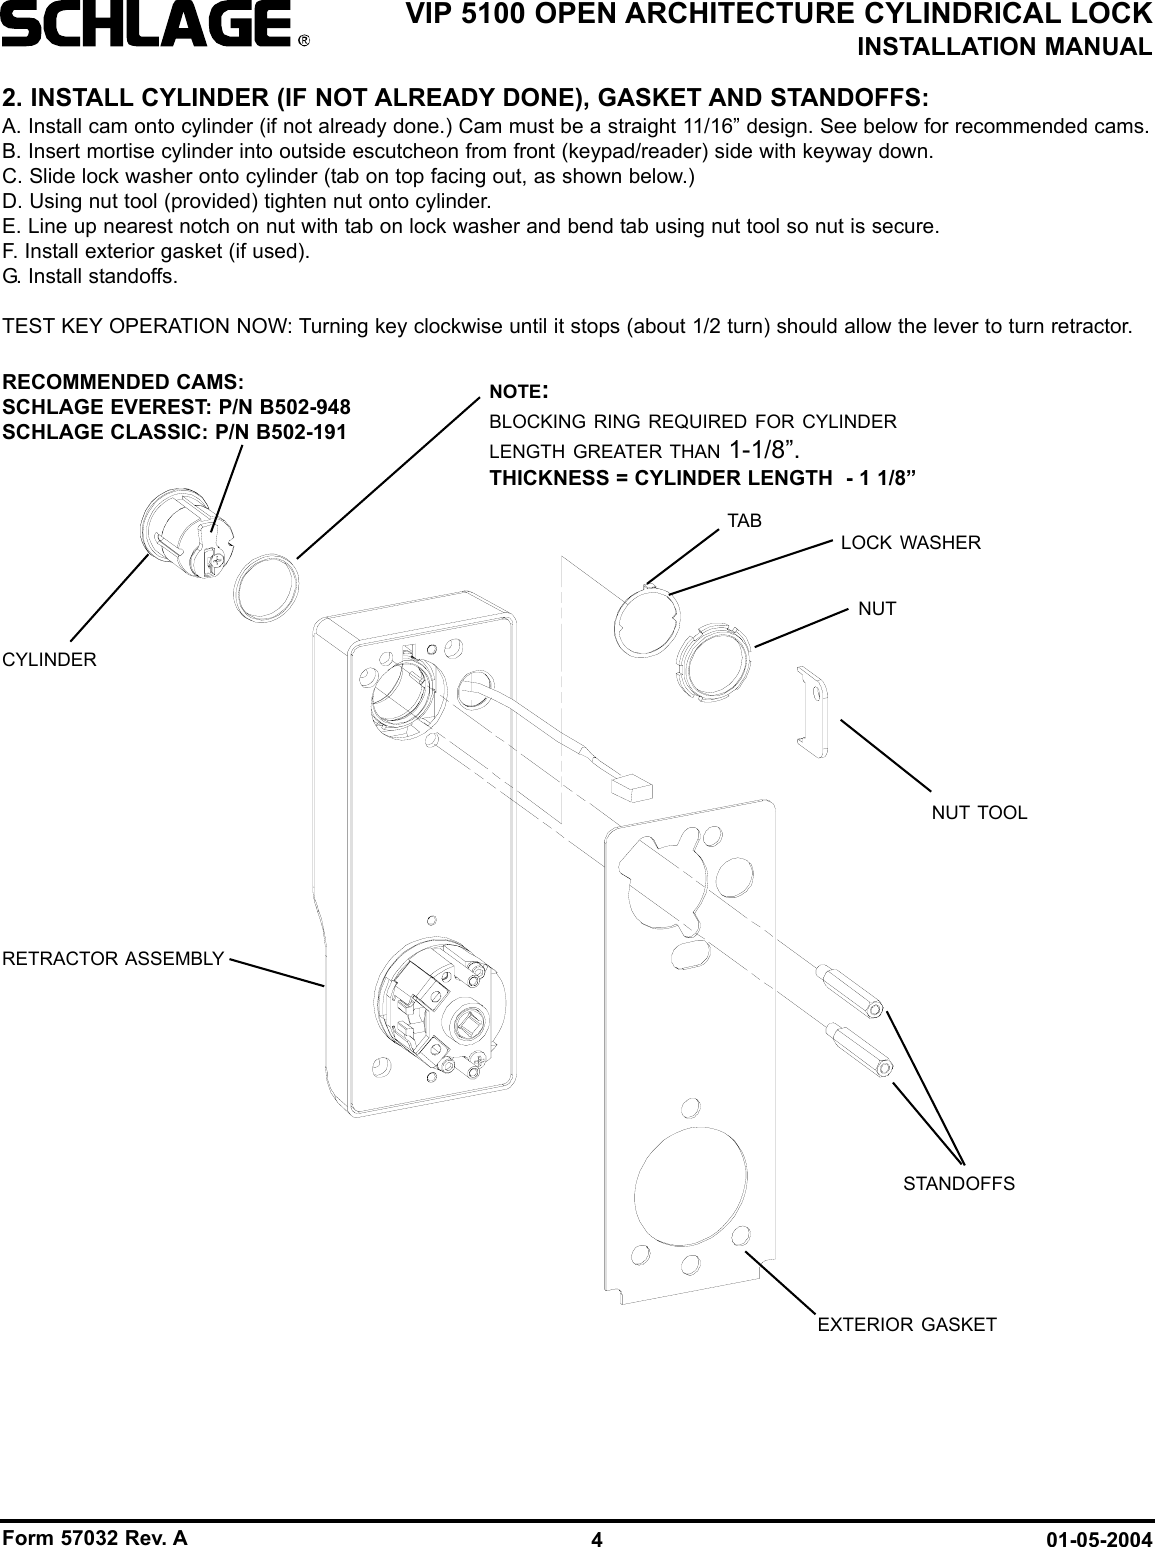 Form 57032 Rev. A 01-05-20044VIP 5100 OPEN ARCHITECTURE CYLINDRICAL LOCKINSTALLATION MANUAL2. INSTALL CYLINDER (IF NOT ALREADY DONE), GASKET AND STANDOFFS:A. Install cam onto cylinder (if not already done.) Cam must be a straight 11/16” design. See below for recommended cams.B. Insert mortise cylinder into outside escutcheon from front (keypad/reader) side with keyway down.C. Slide lock washer onto cylinder (tab on top facing out, as shown below.)D. Using nut tool (provided) tighten nut onto cylinder.E. Line up nearest notch on nut with tab on lock washer and bend tab using nut tool so nut is secure. F. Install exterior gasket (if used).G. Install standoffs.TEST KEY OPERATION NOW: Turning key clockwise until it stops (about 1/2 turn) should allow the lever to turn retractor.CYLINDERRECOMMENDED CAMS:SCHLAGE EVEREST: P/N B502-948SCHLAGE CLASSIC: P/N B502-191NUT TOOLRETRACTOR ASSEMBLYLOCK WASHERNUTSTANDOFFSEXTERIOR GASKETTABNOTE:BLOCKING RING REQUIRED FOR CYLINDERLENGTH GREATER THAN 1-1/8”.THICKNESS = CYLINDER LENGTH  - 1 1/8”